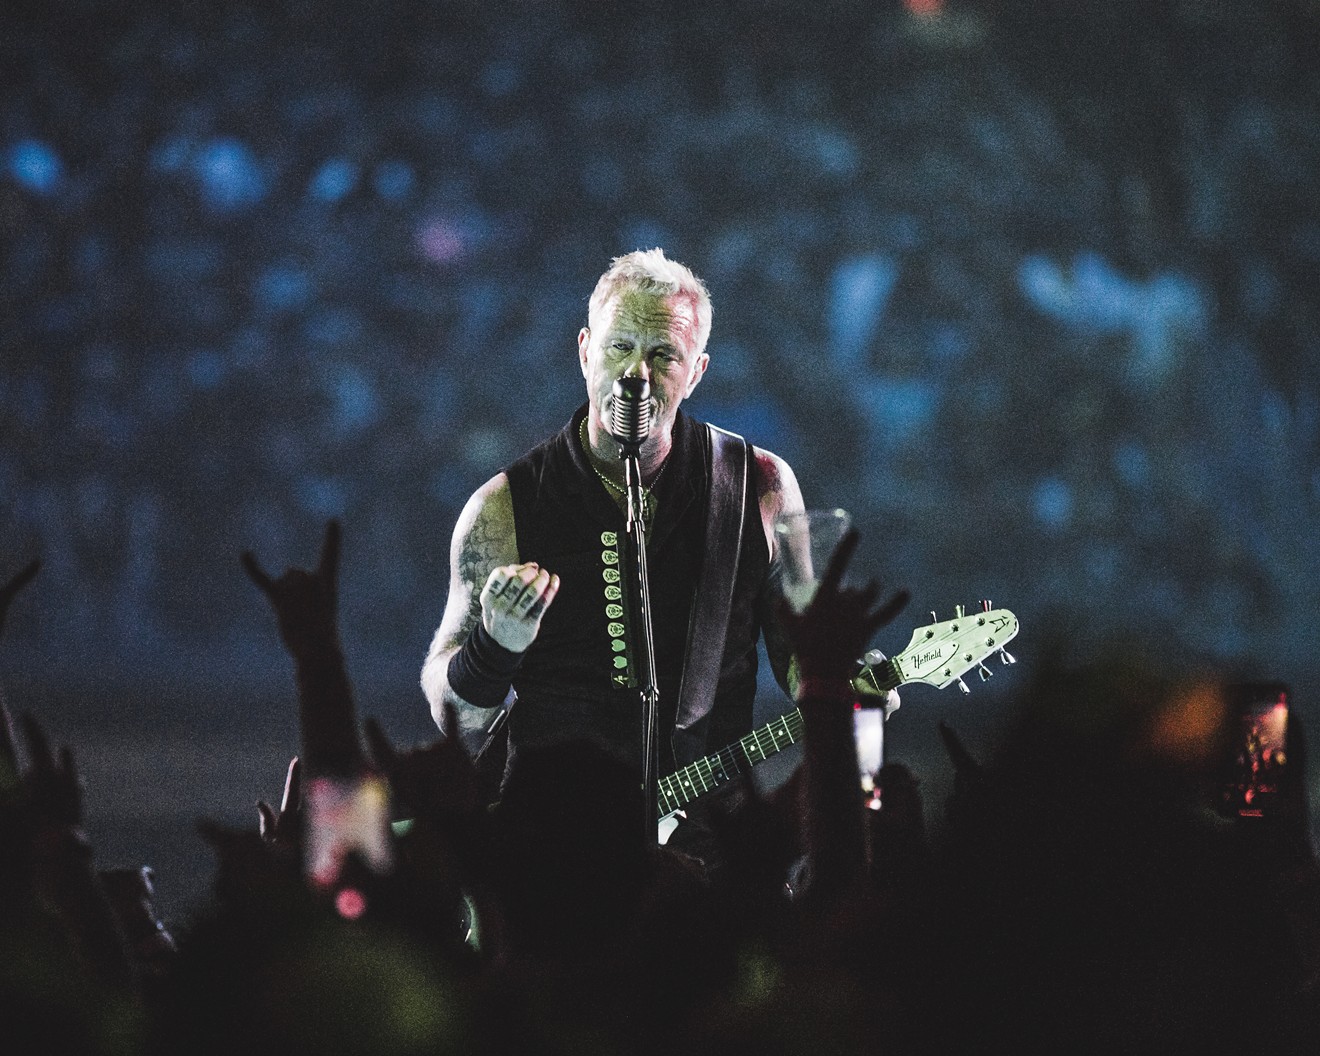 Metallica was one of the biggest shows to come through North Texas this year.